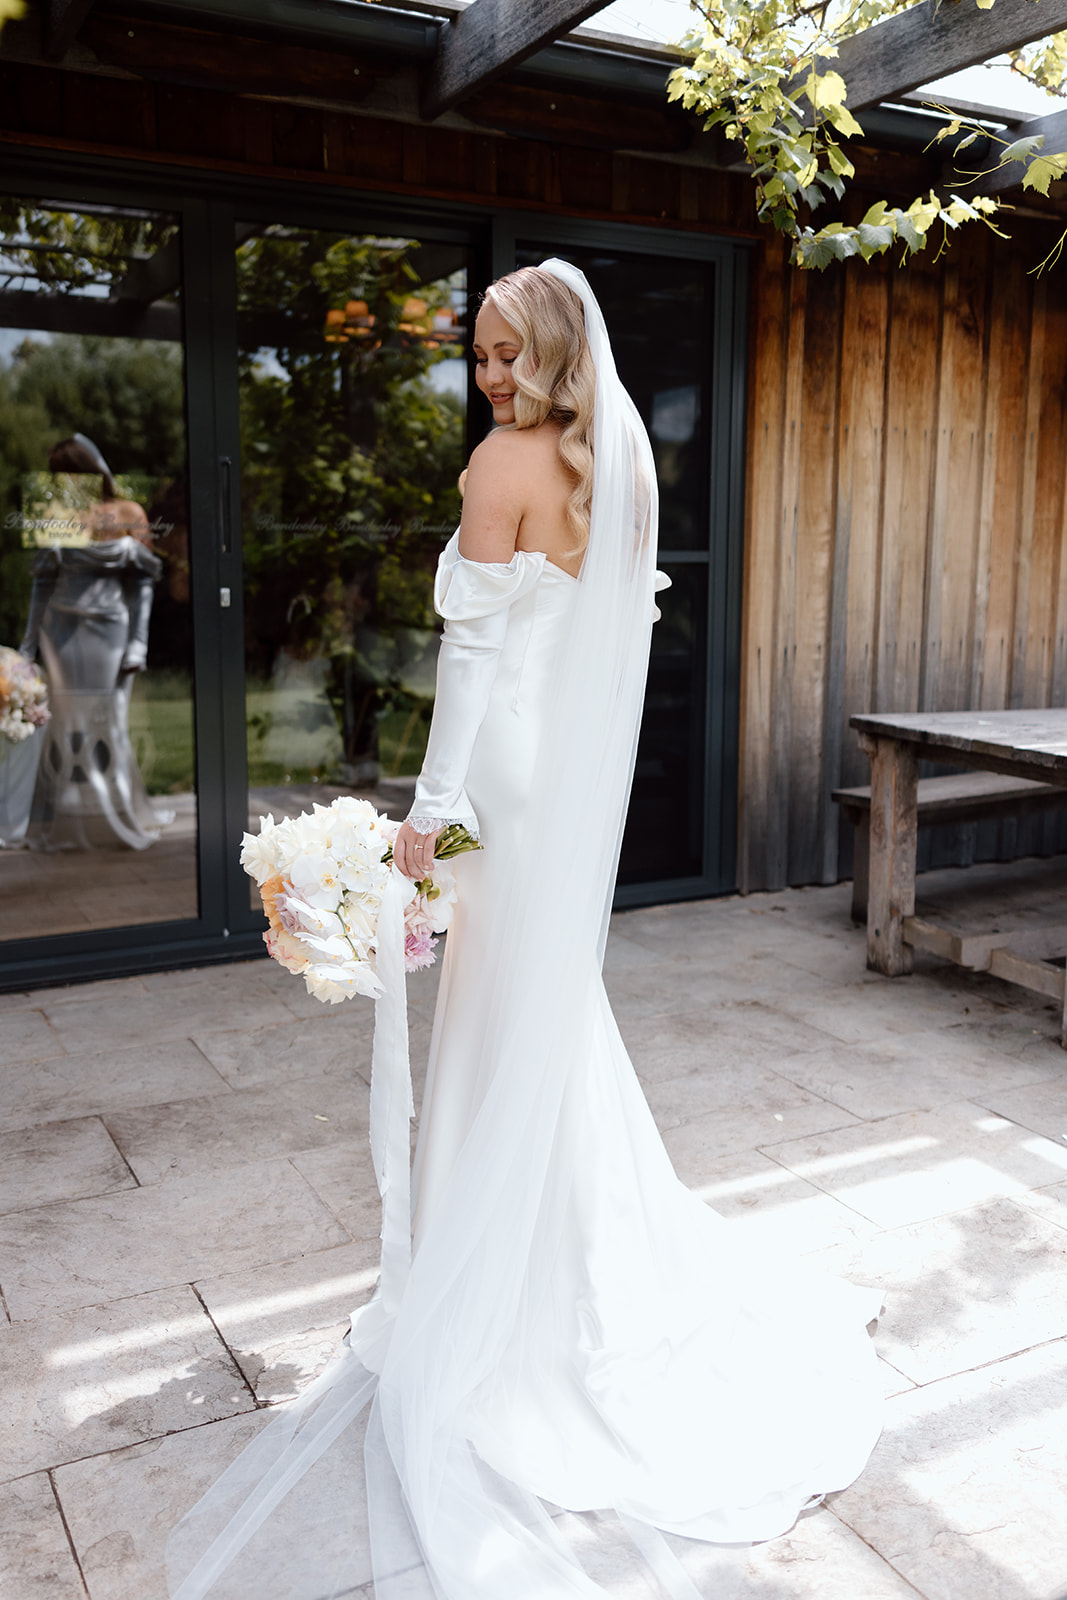 Bride portraits at the wedding in the Southern Highlands Bendooley Estate